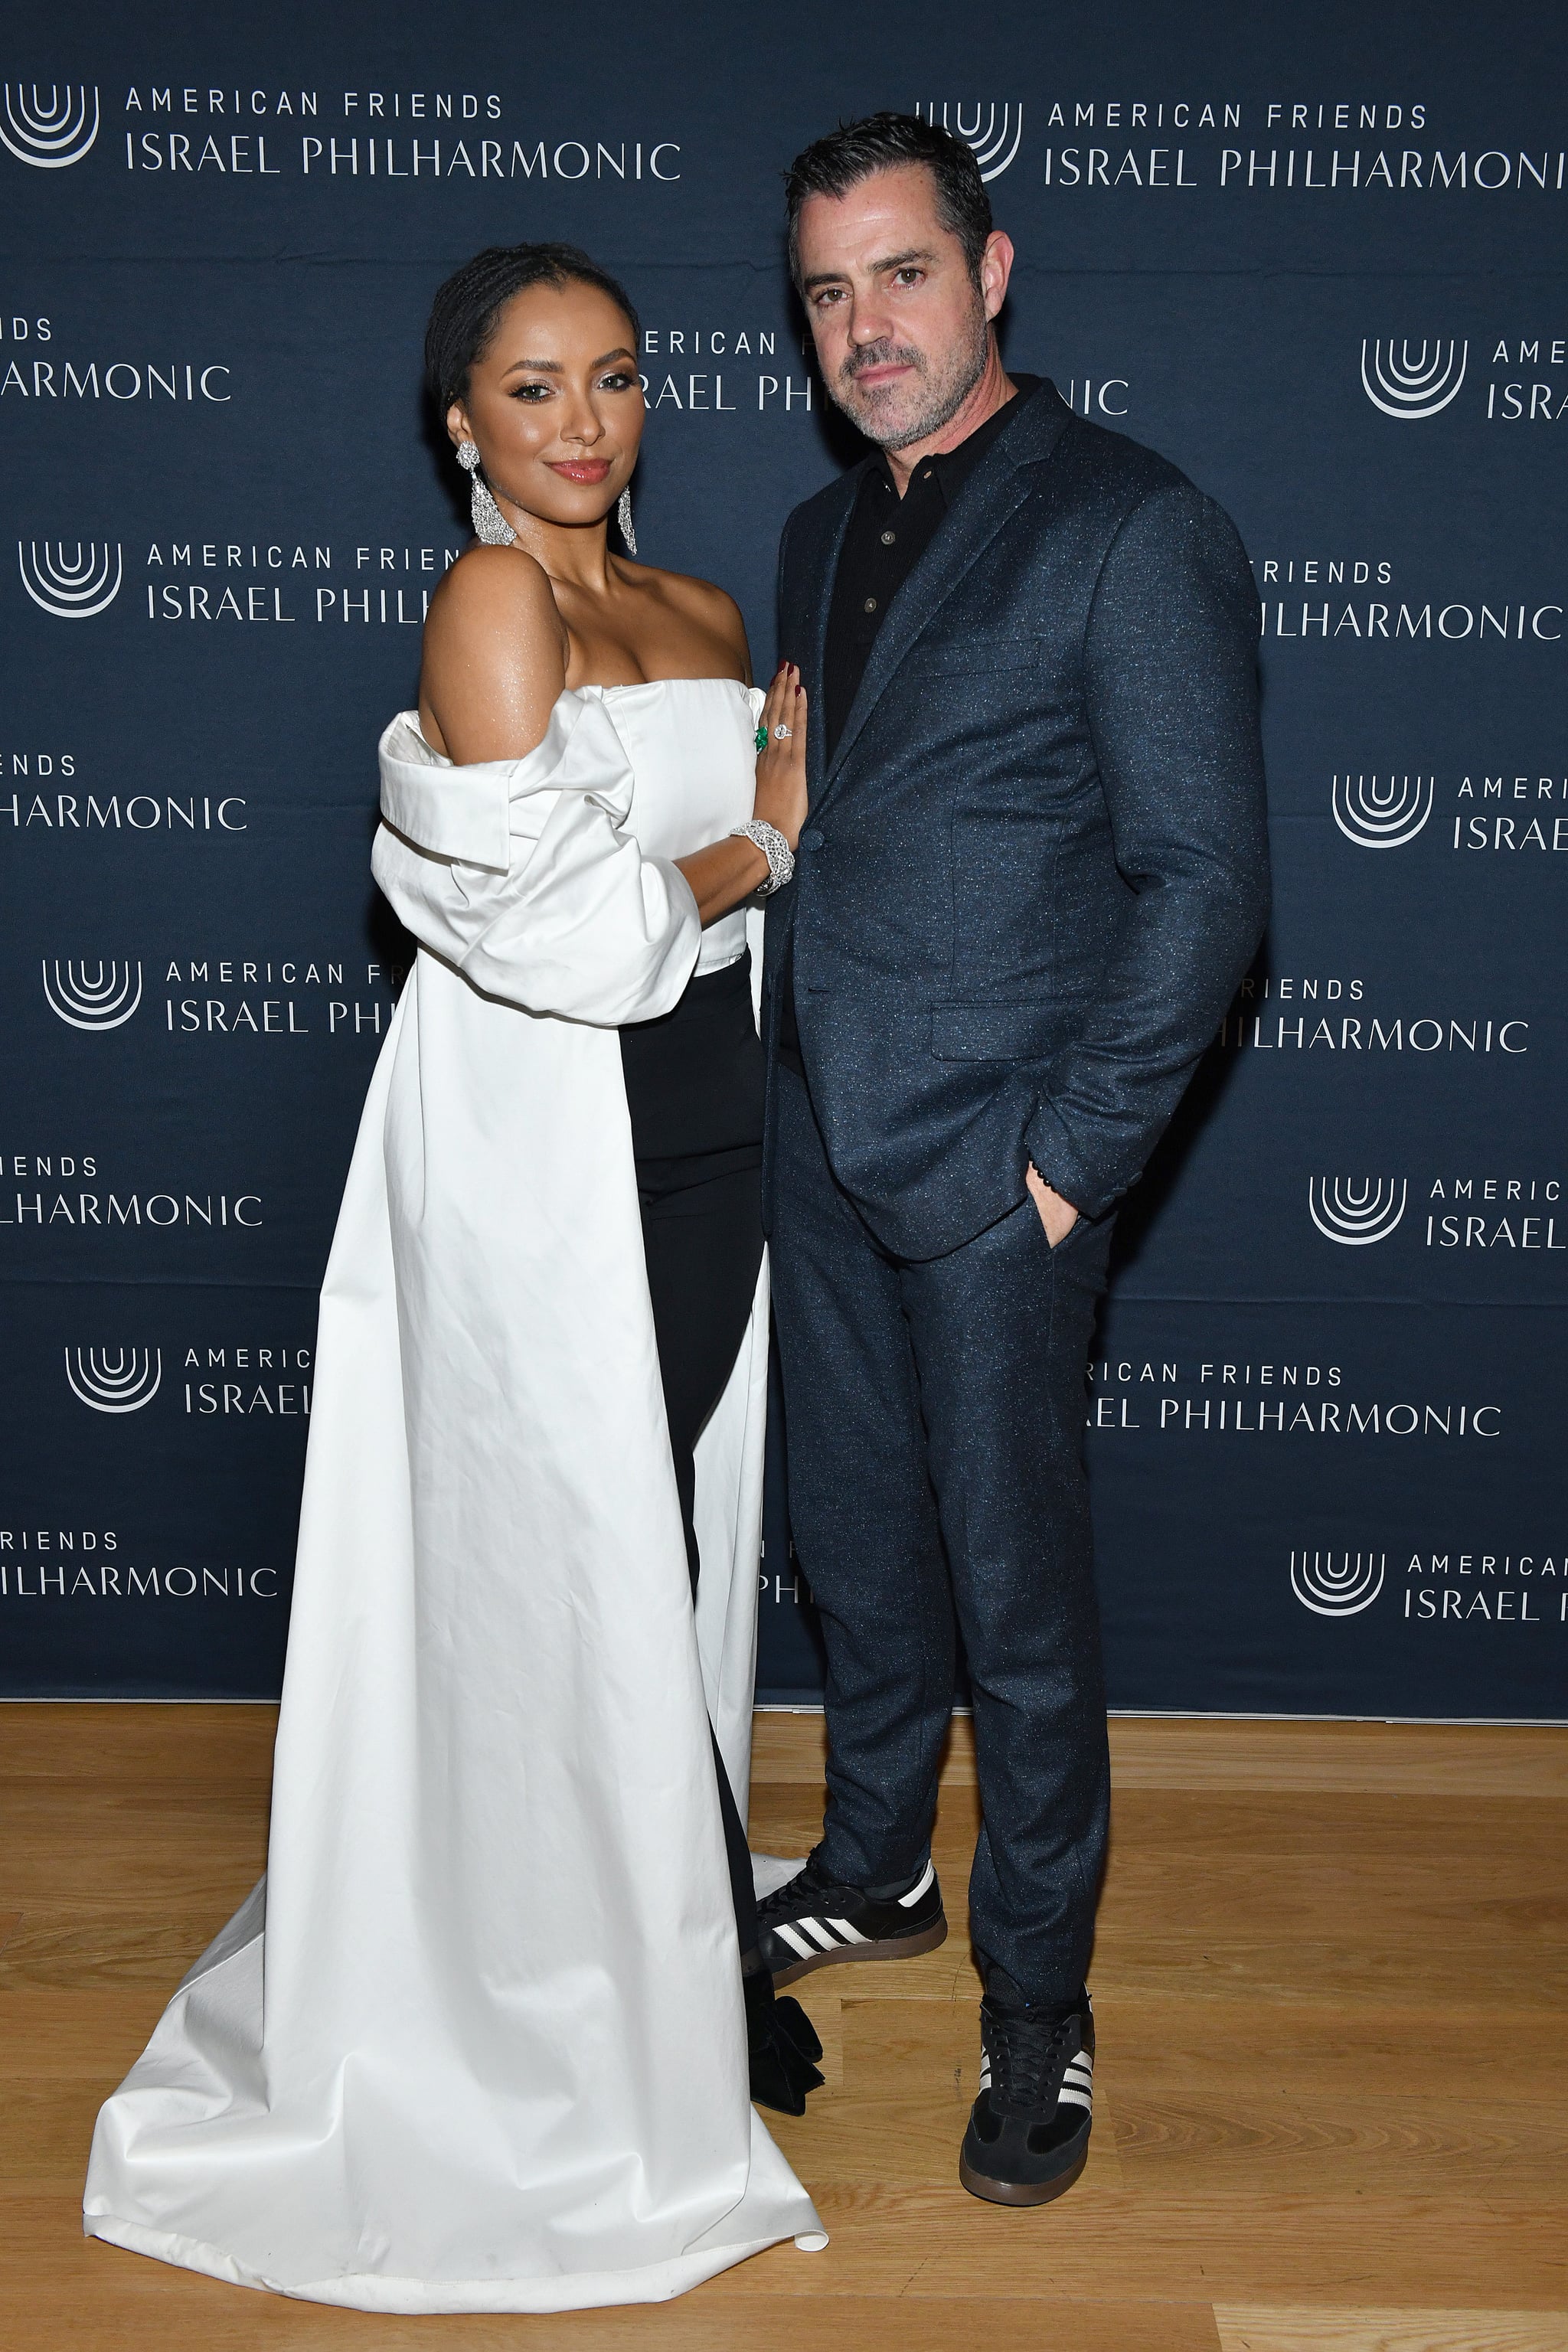 NEW YORK, NEW YORK - DECEMBER 01: Kat Graham and Darren Genet attend the American Friends of the Israel Philharmonic New York Gala at The Morgan Library on December 01, 2021 in New York City. (Photo by Craig Barritt/Getty Images for American Friends of the Israel Philharmonic )